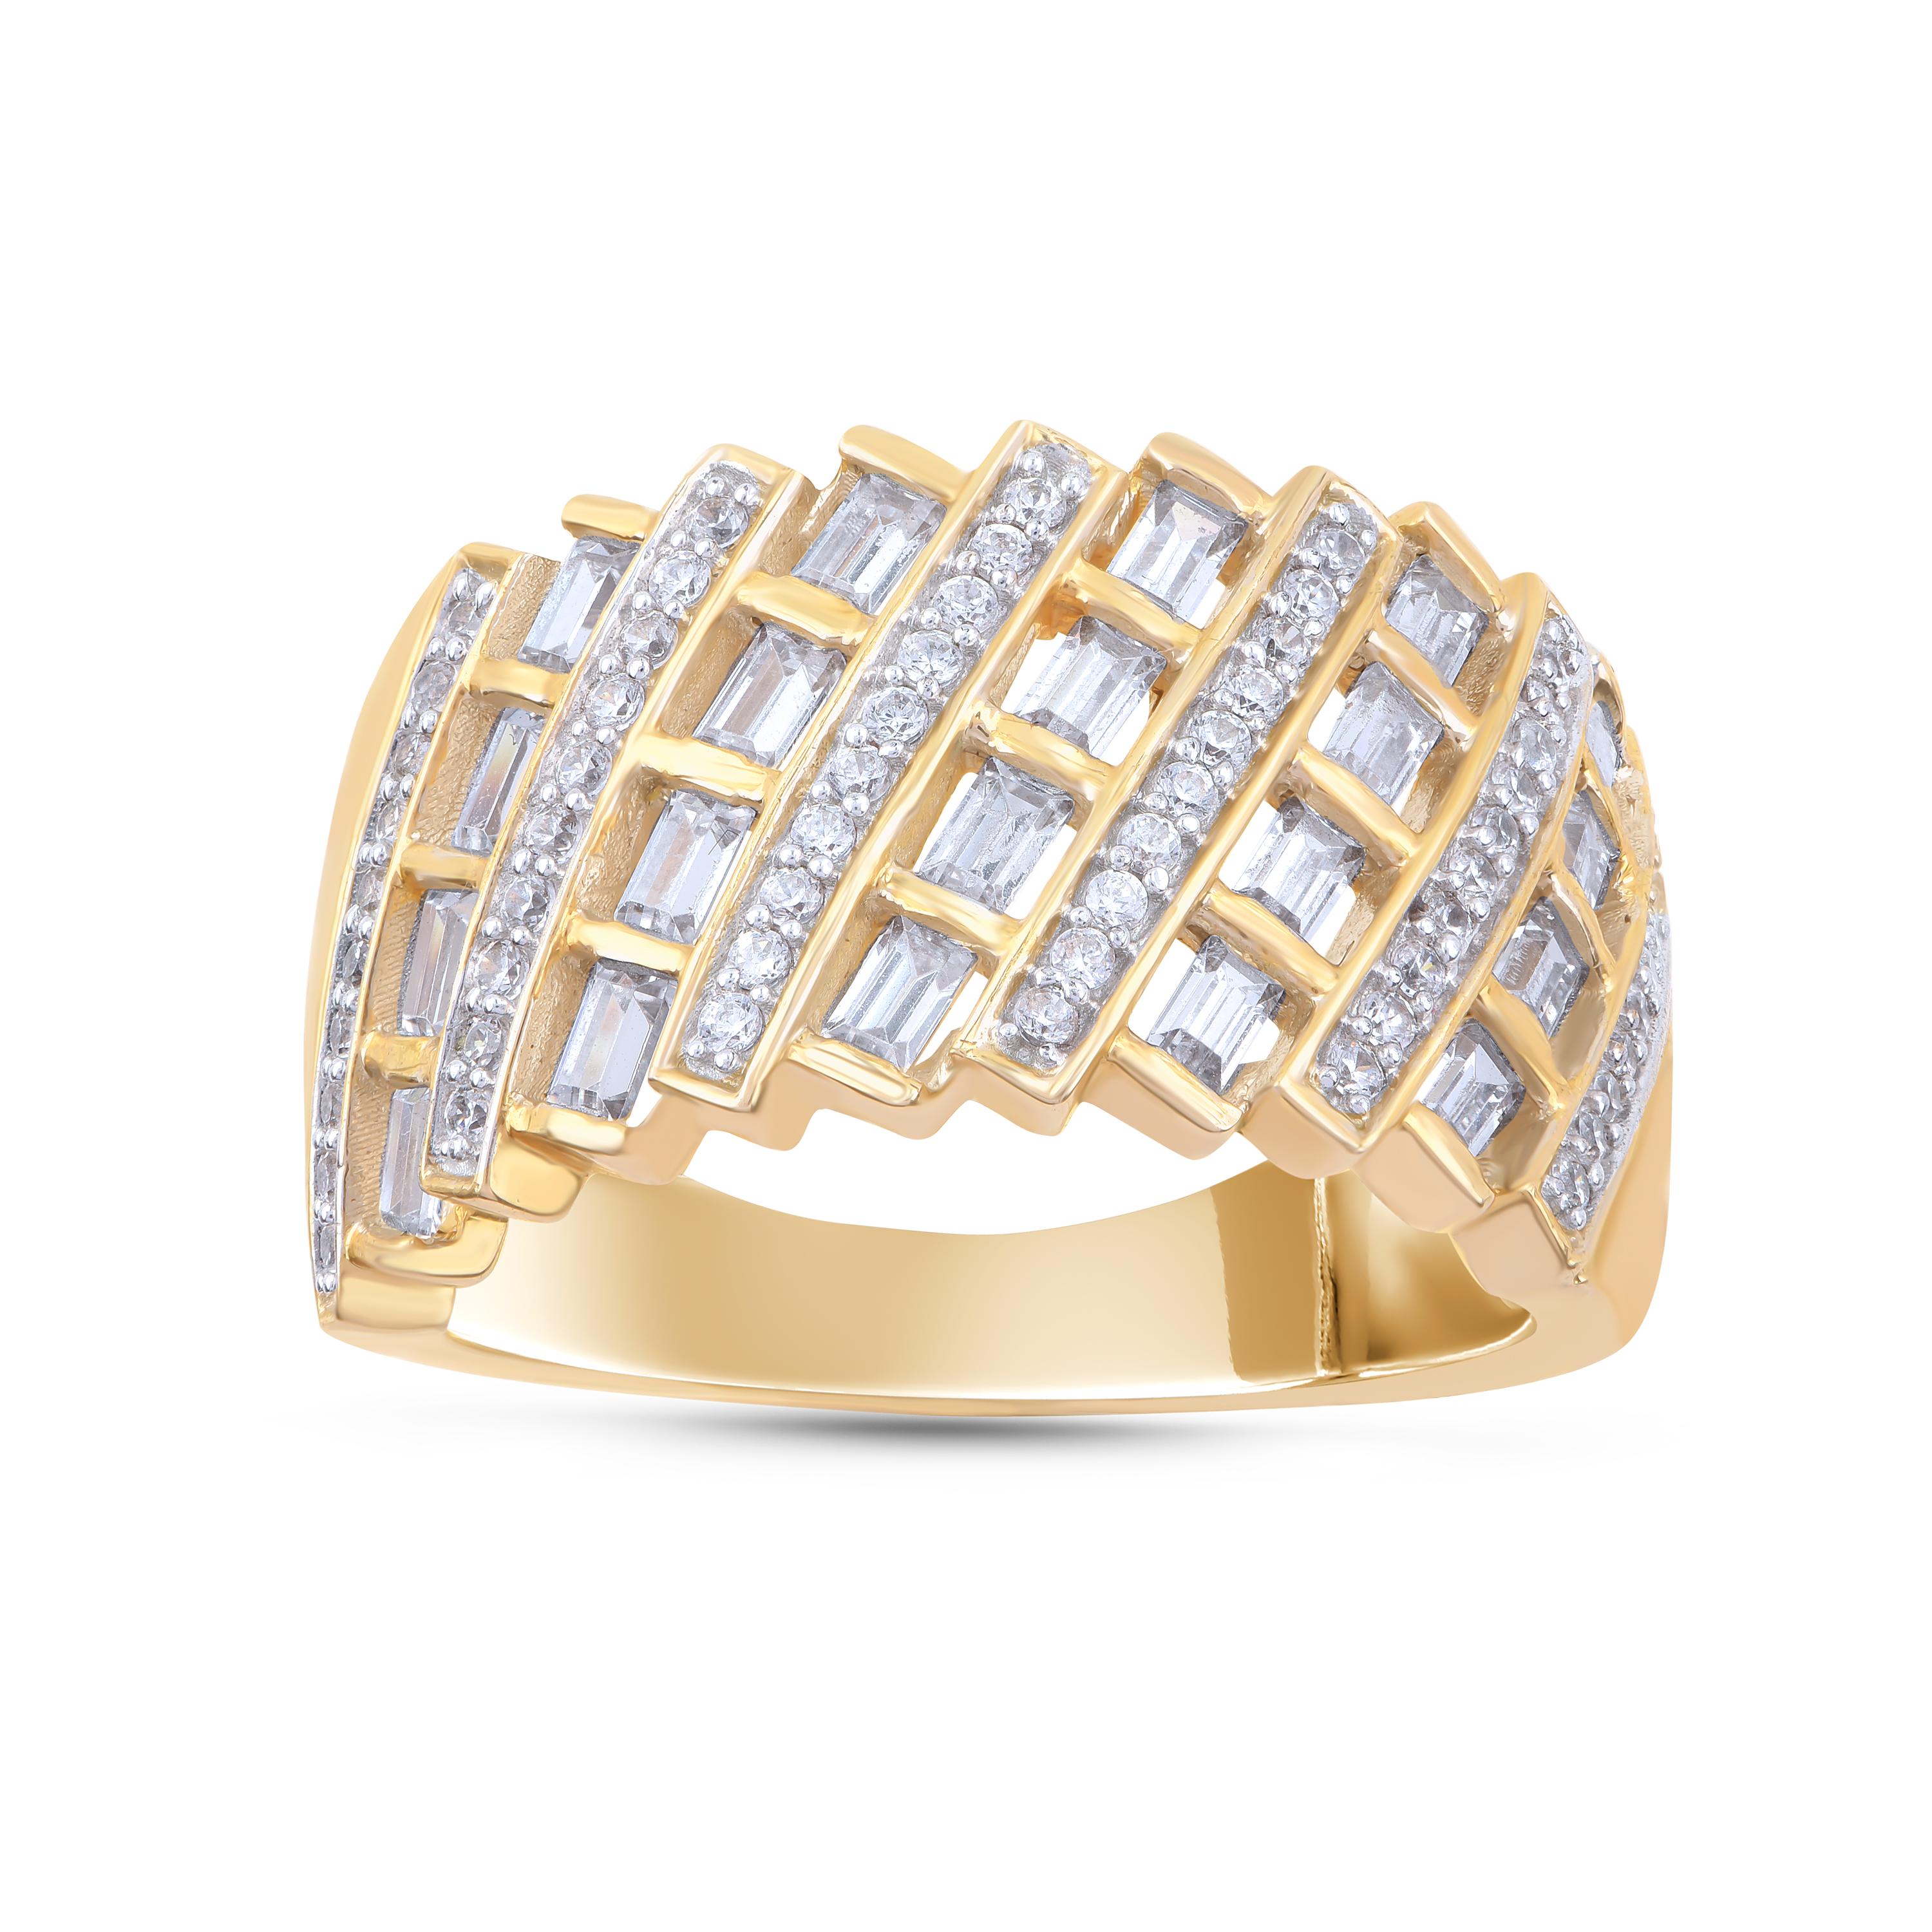 Create an impressive look with these natural brilliant and baguette diamond ring. Studded with 60 brilliant and 40 baguette diamonds in channel and pave setting and crafted beautifully in 18 kt yellow gold. Diamonds are graded H-I Color, I2 Clarity.